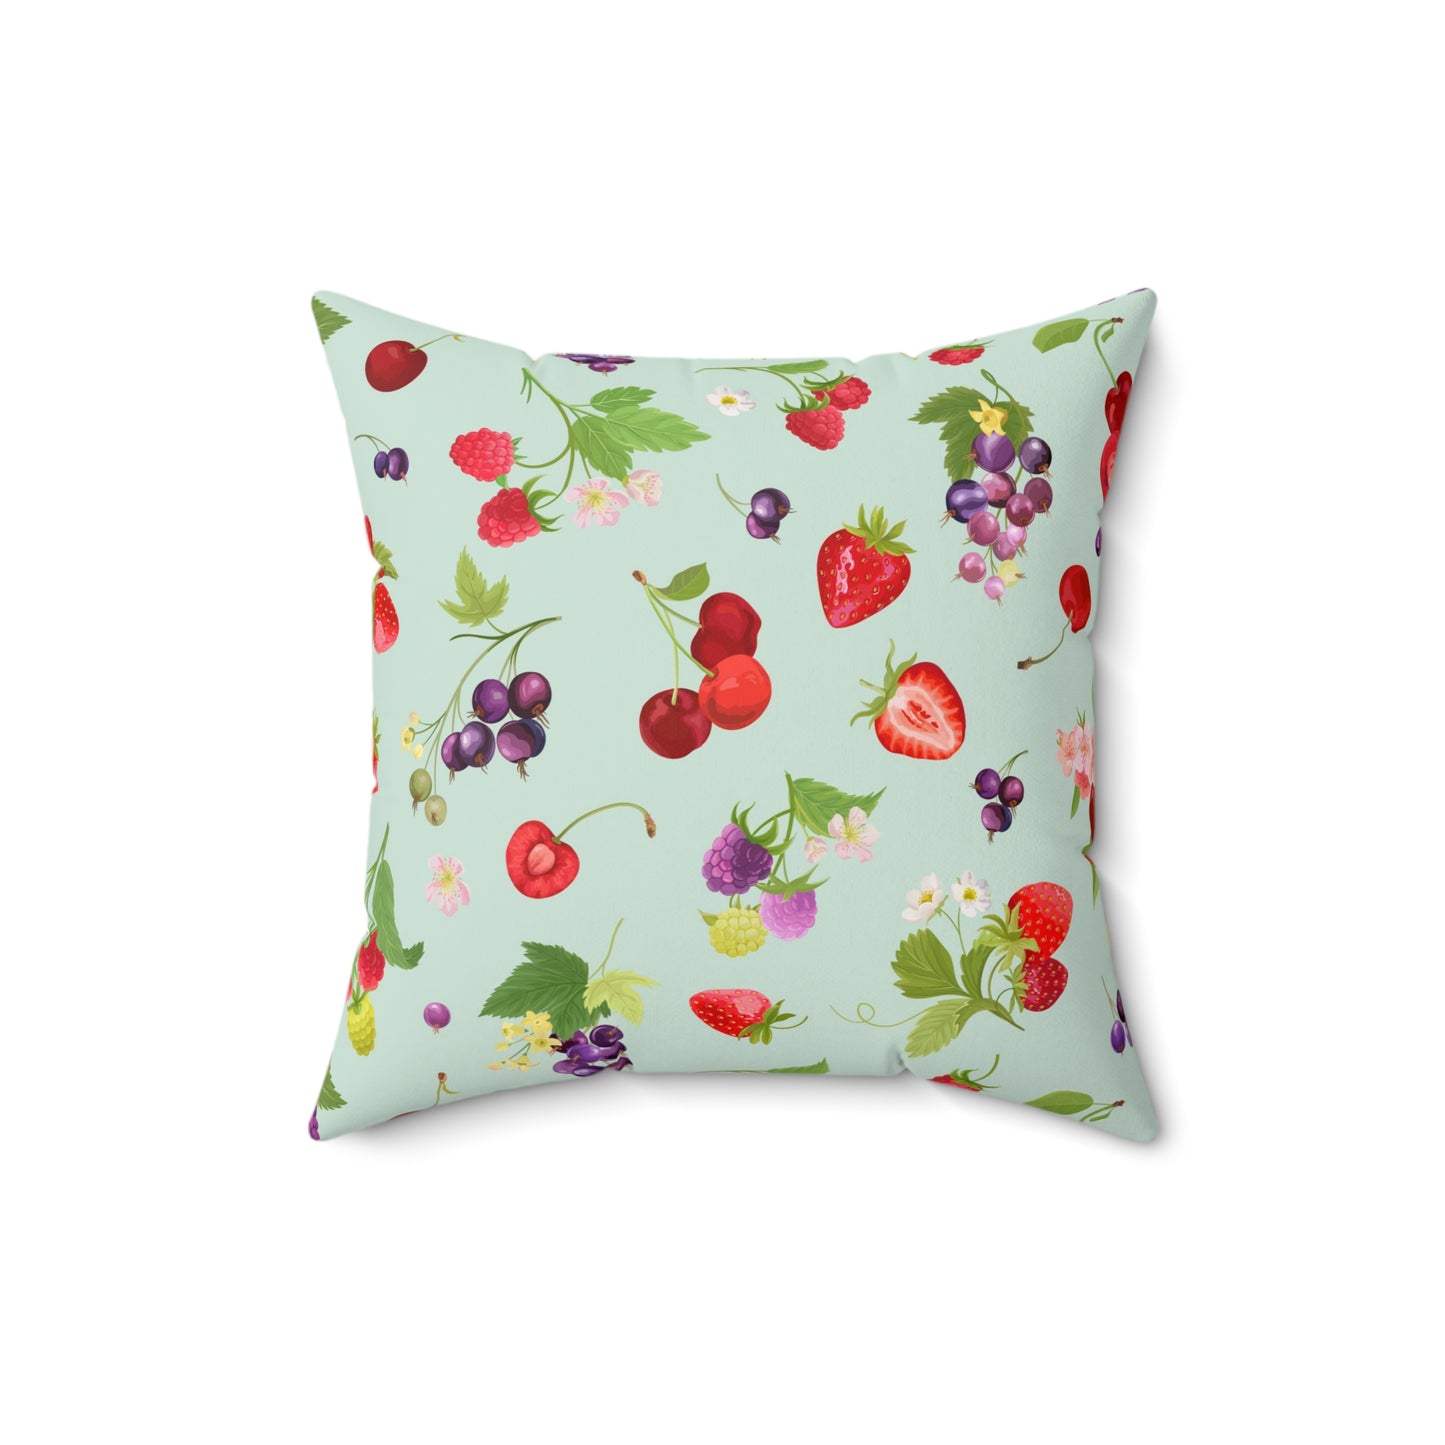 Cherries and Strawberries Spun Polyester Square Pillow